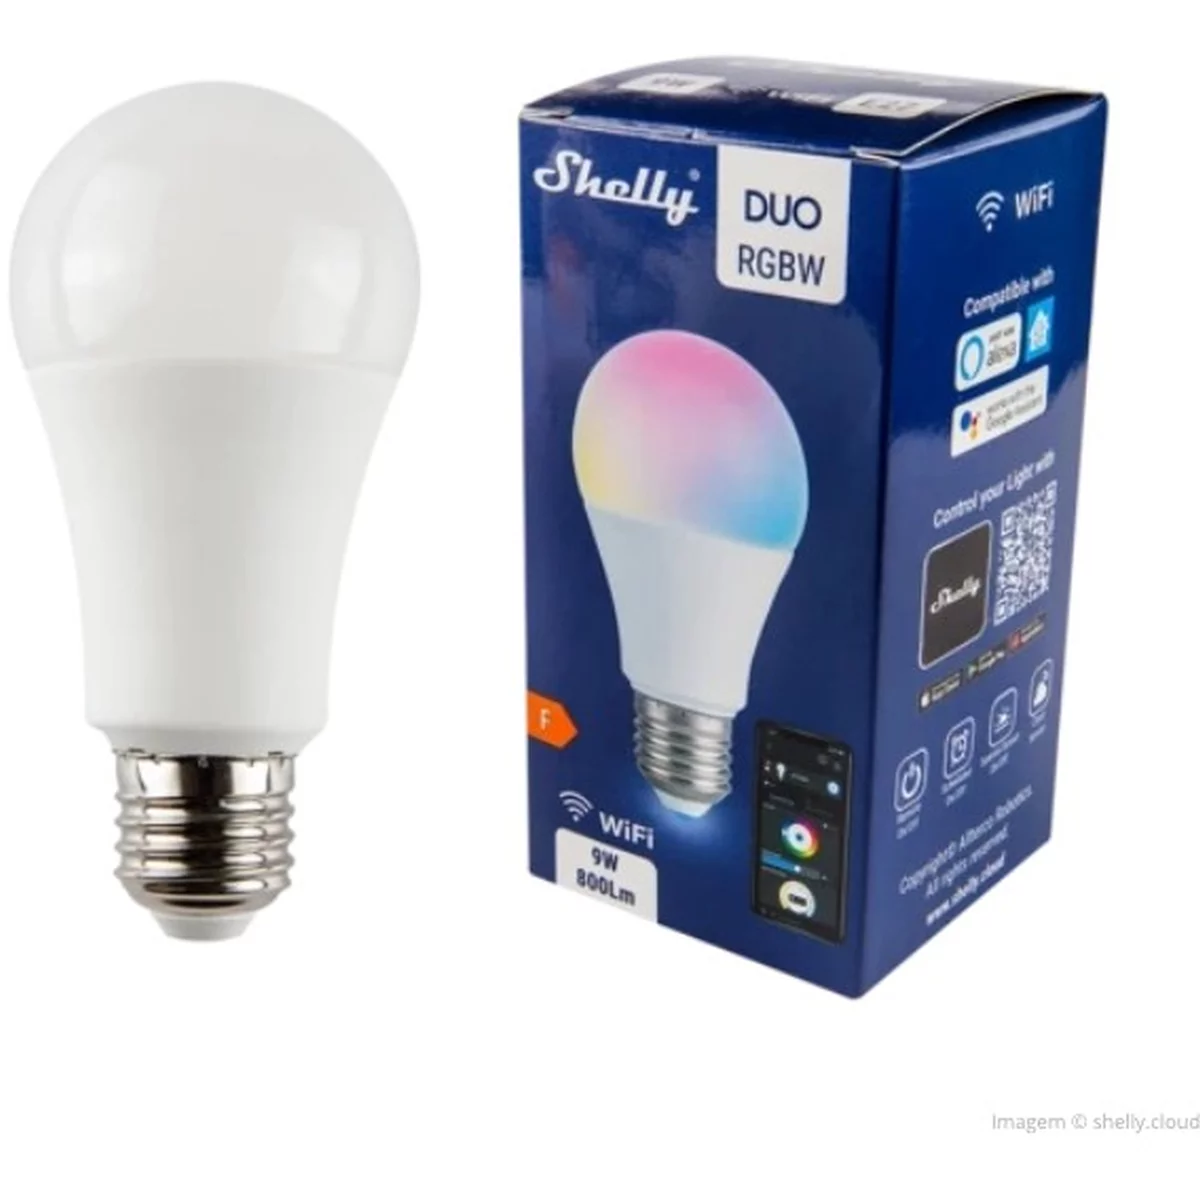 Home Shelly Plug & Play Beleuchtung “Duo RGBW“ WLAN LED Lampe